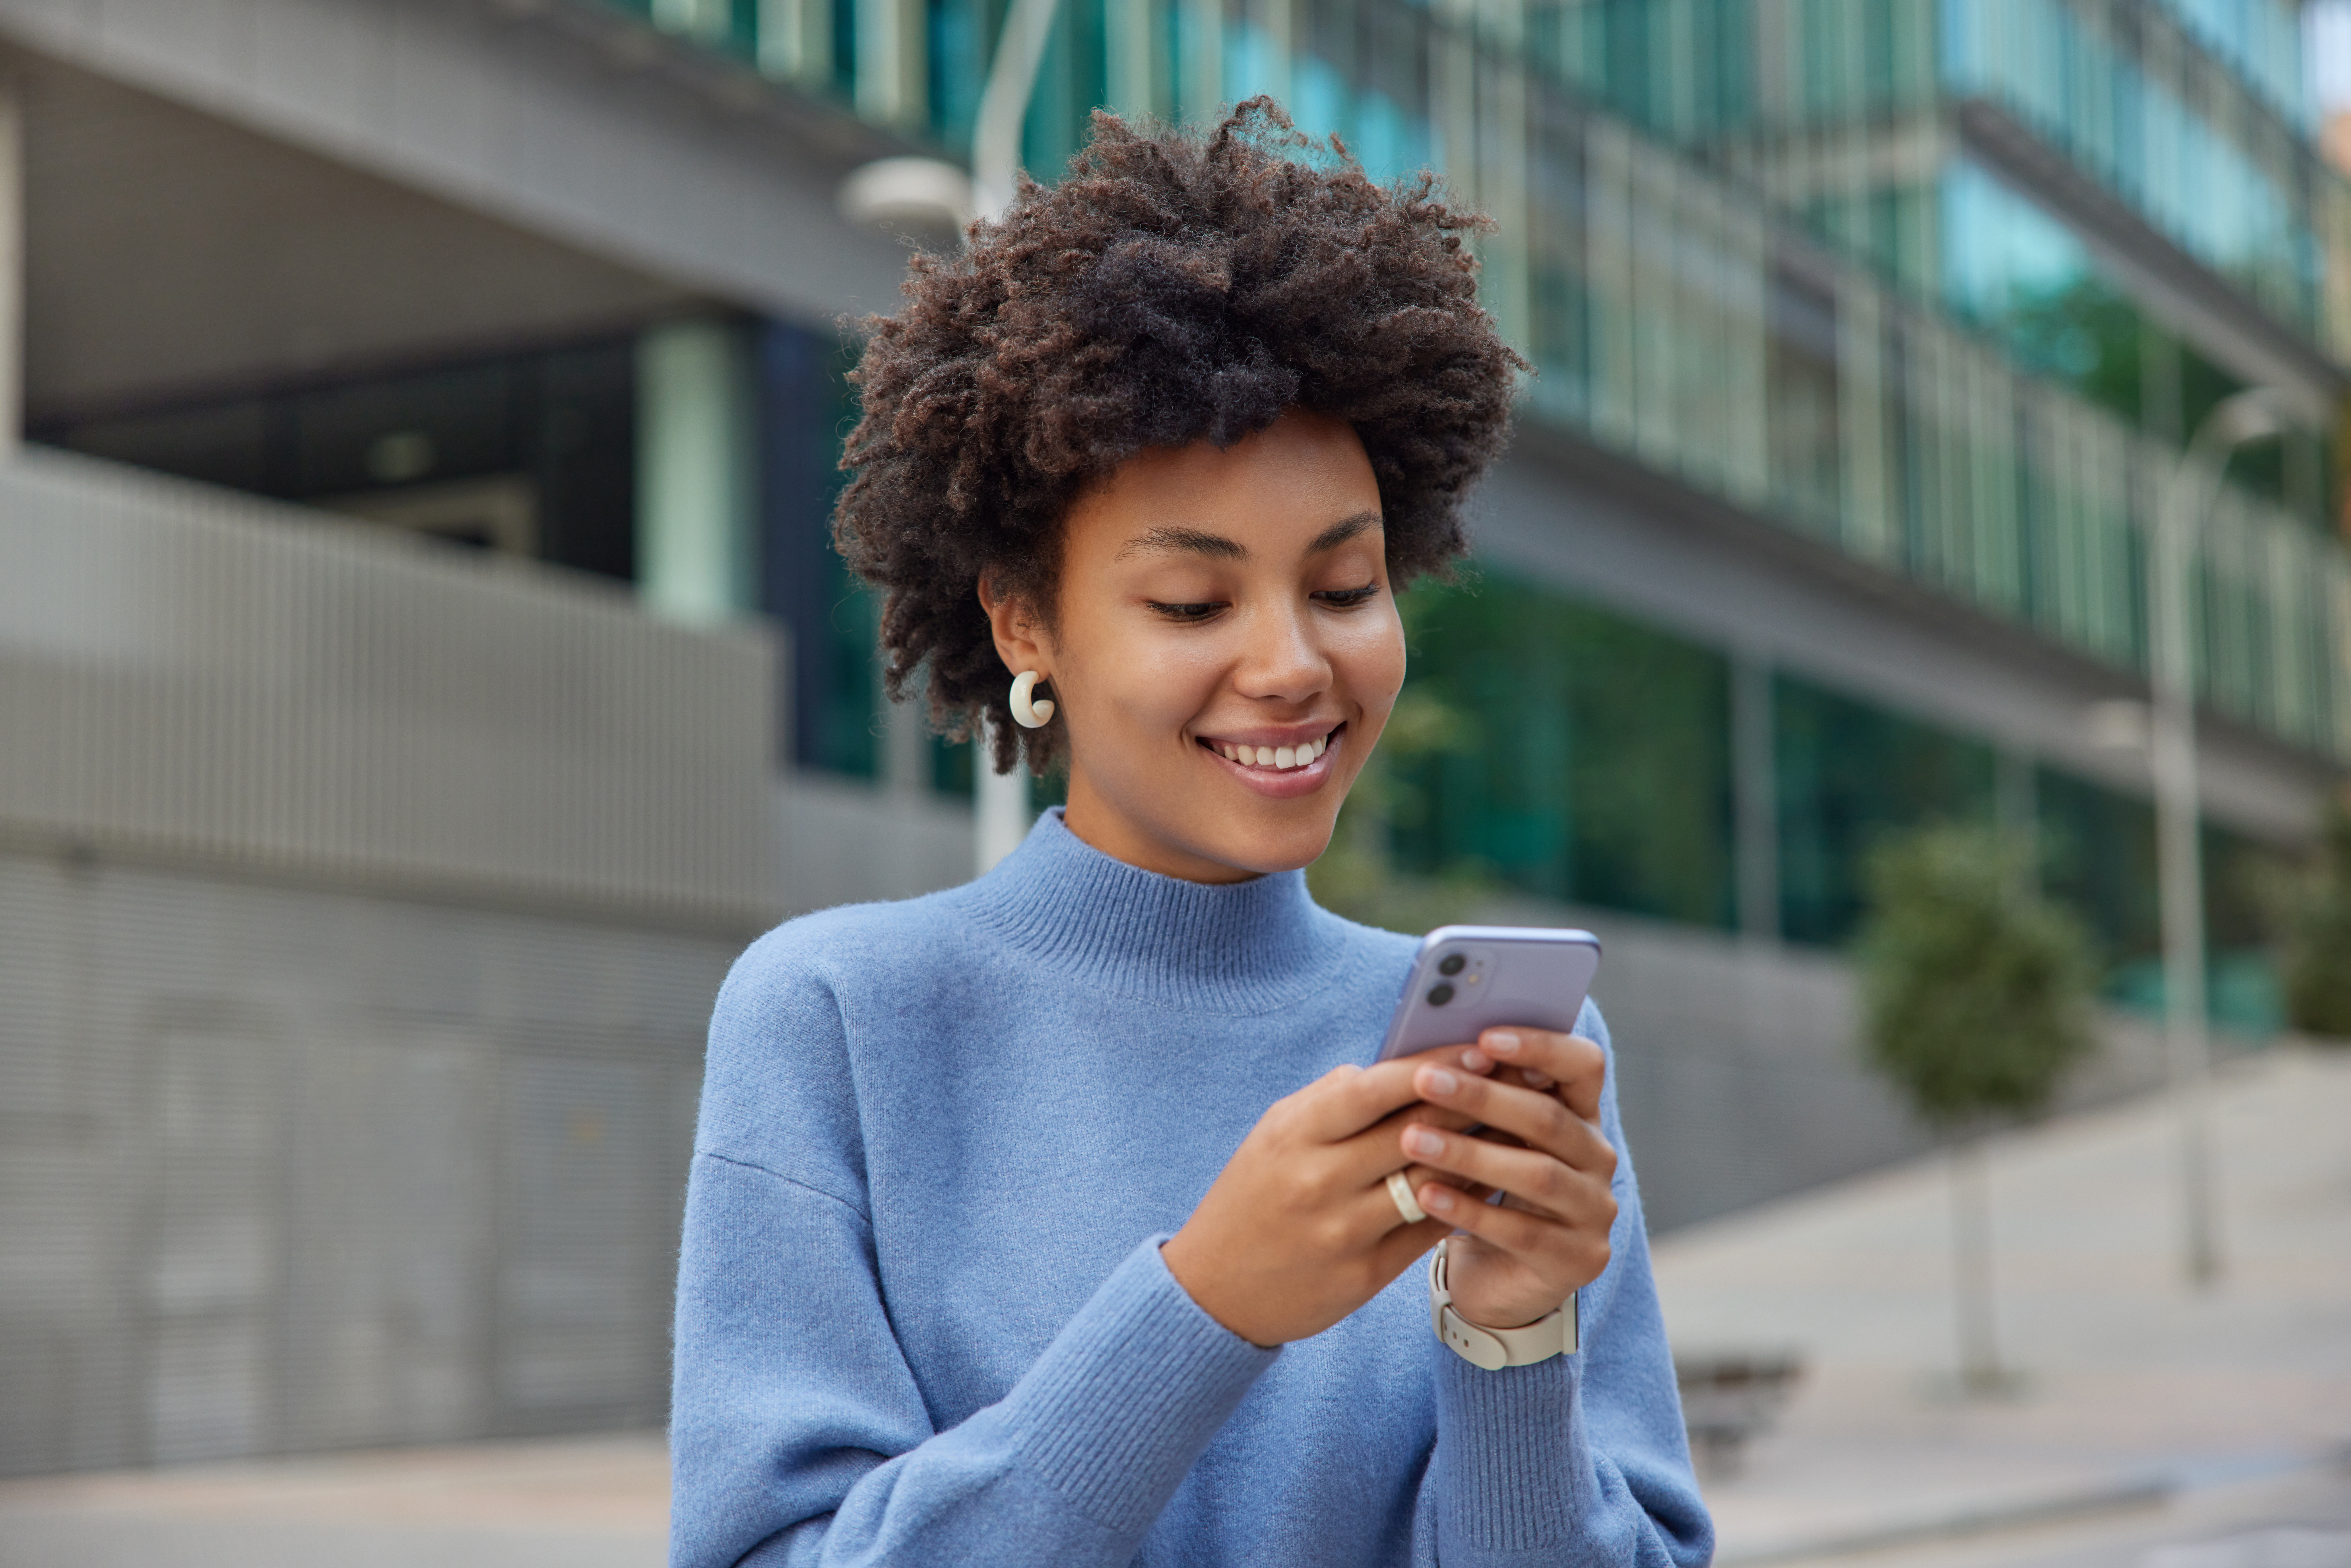 Glad young woman with curly bushy hair holds modern mobile phone downloads amazing application surfs social networks wears casual blue jumper smiles positively poses against blurred background